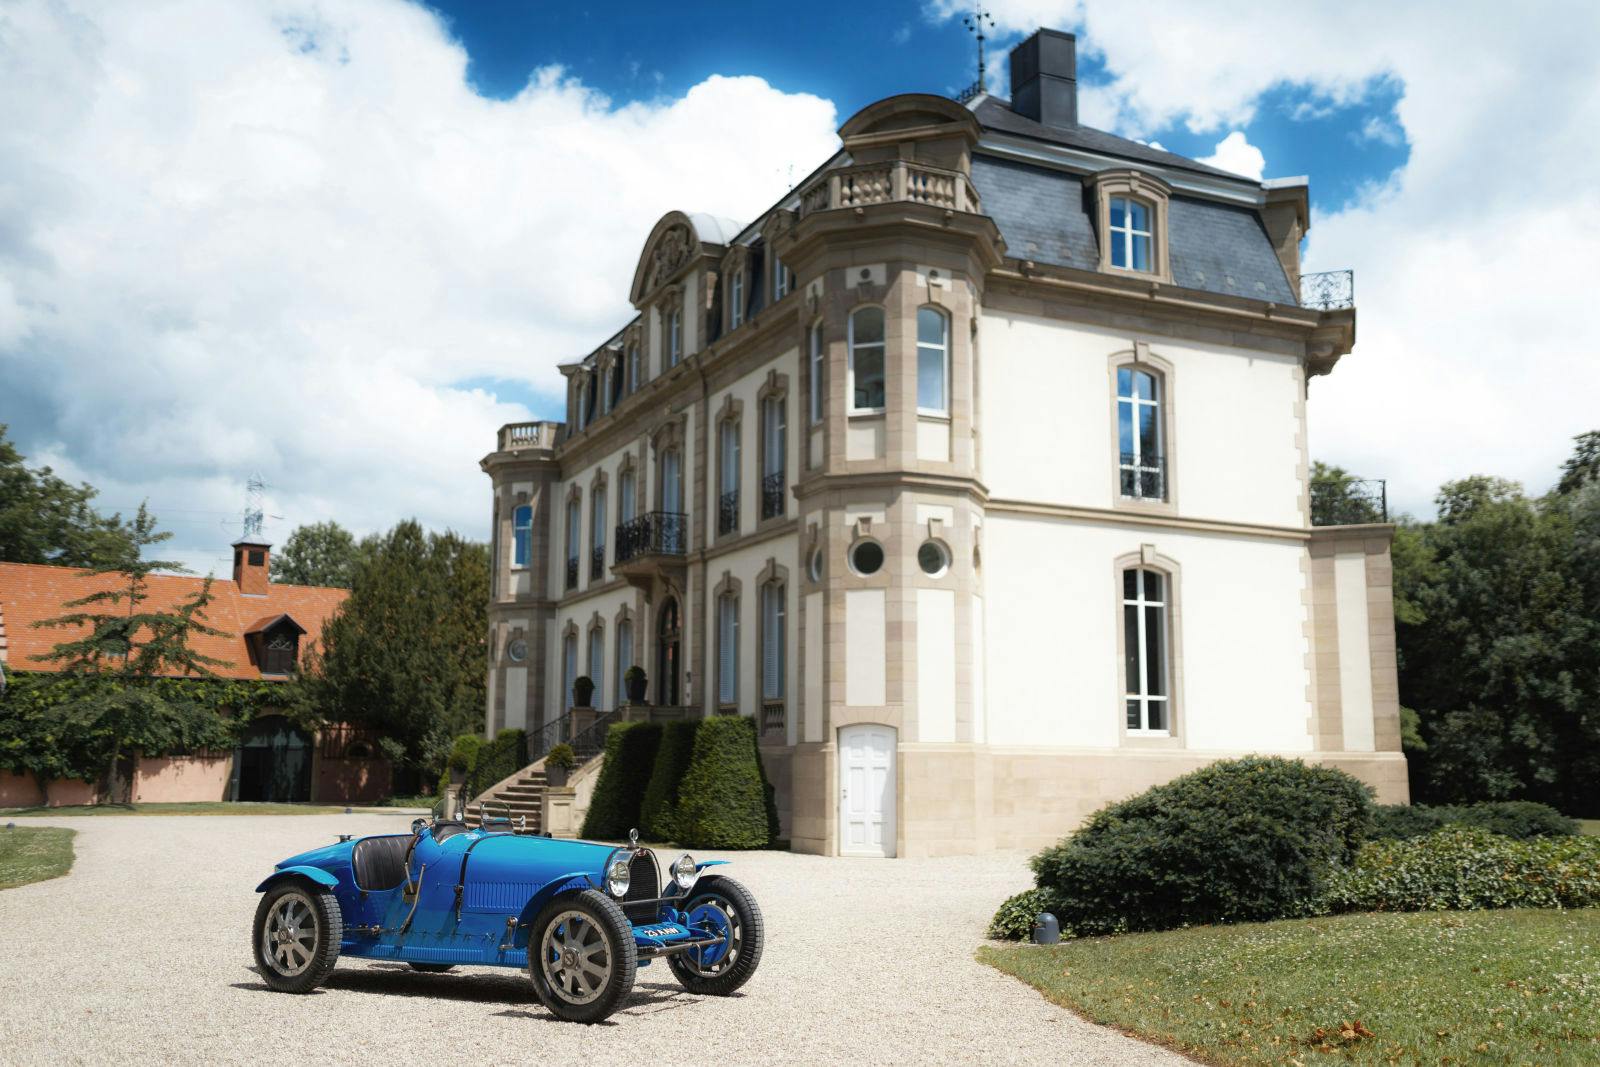 Many of the Bugatti Type 35 models, wore a vibrant shade of blue instantly recognizable to crowds.